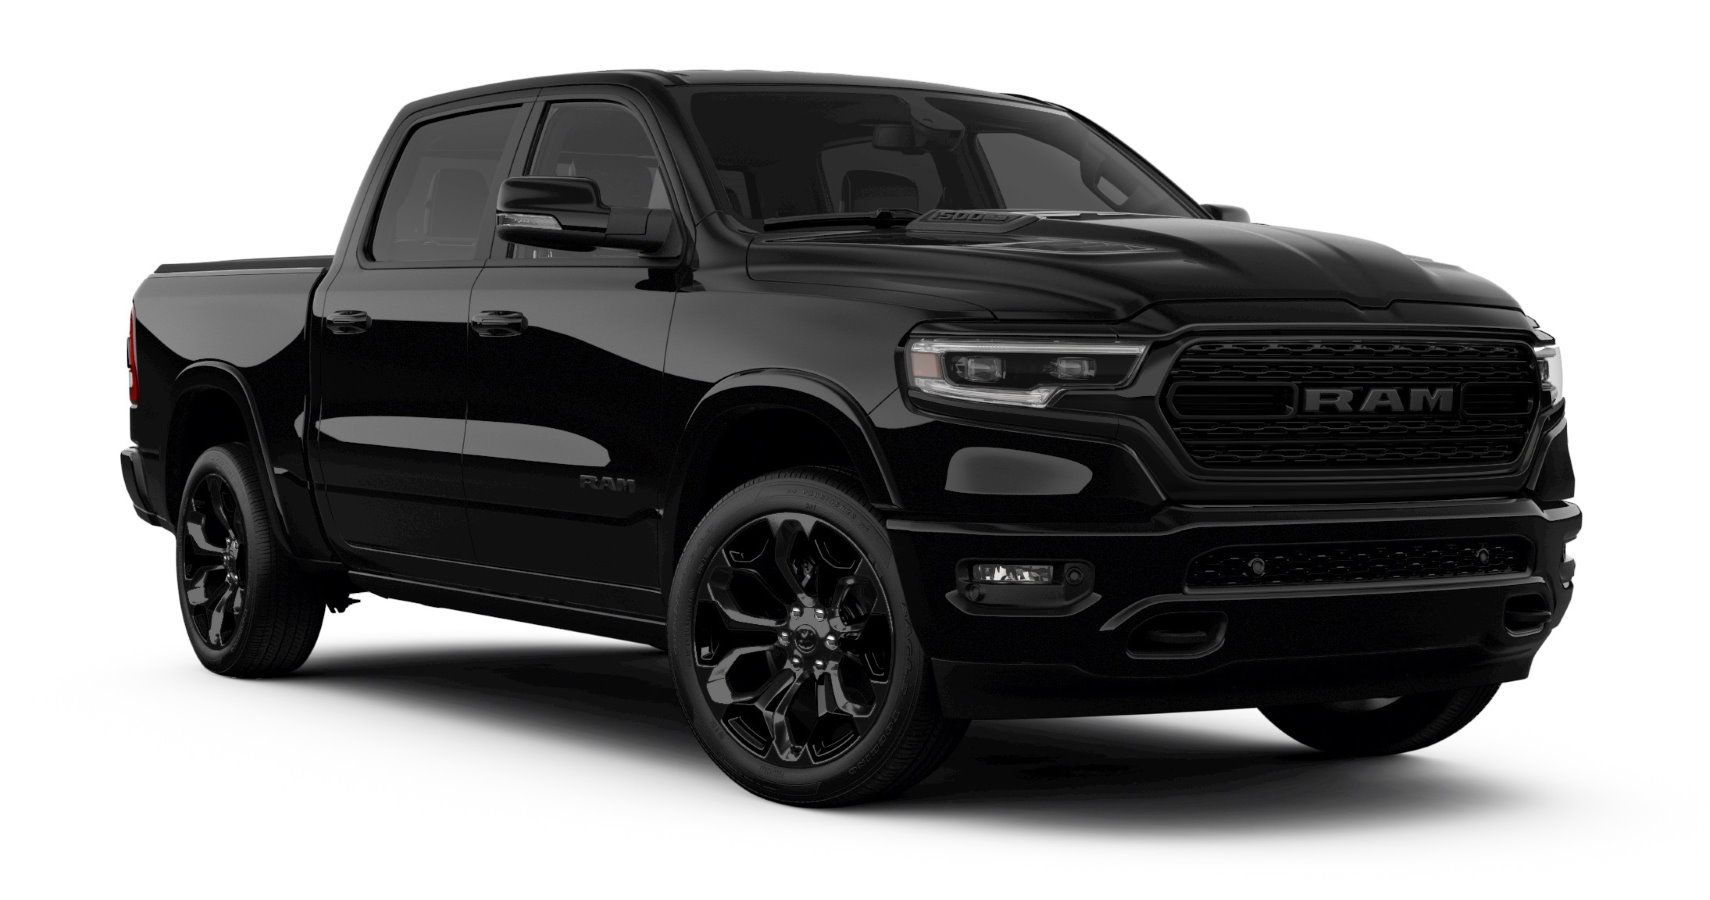 Ram Embraces The Darkness With 1500 Black And Night Edition Pickups